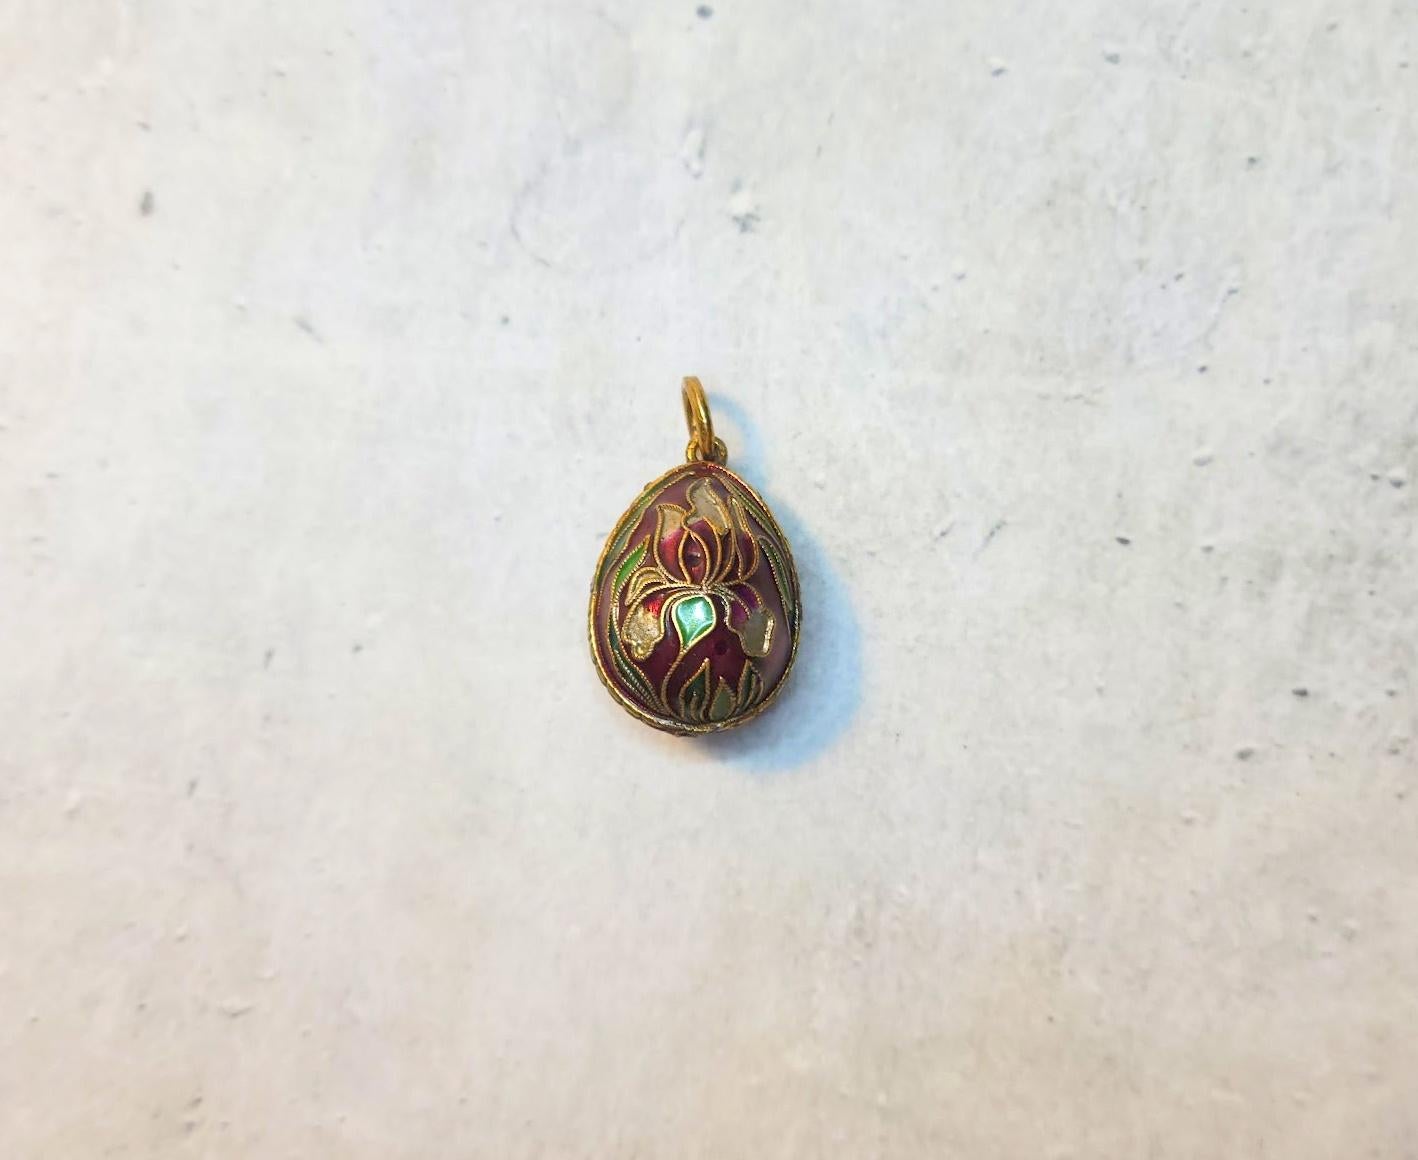 This exquisite vintage Chinese gilded silver egg pendant, adorned with stunning cloisonné enamel floral motifs and granulated accents, features the revered iris flower. In Chinese culture, the iris symbolizes the promise of good news and the arrival